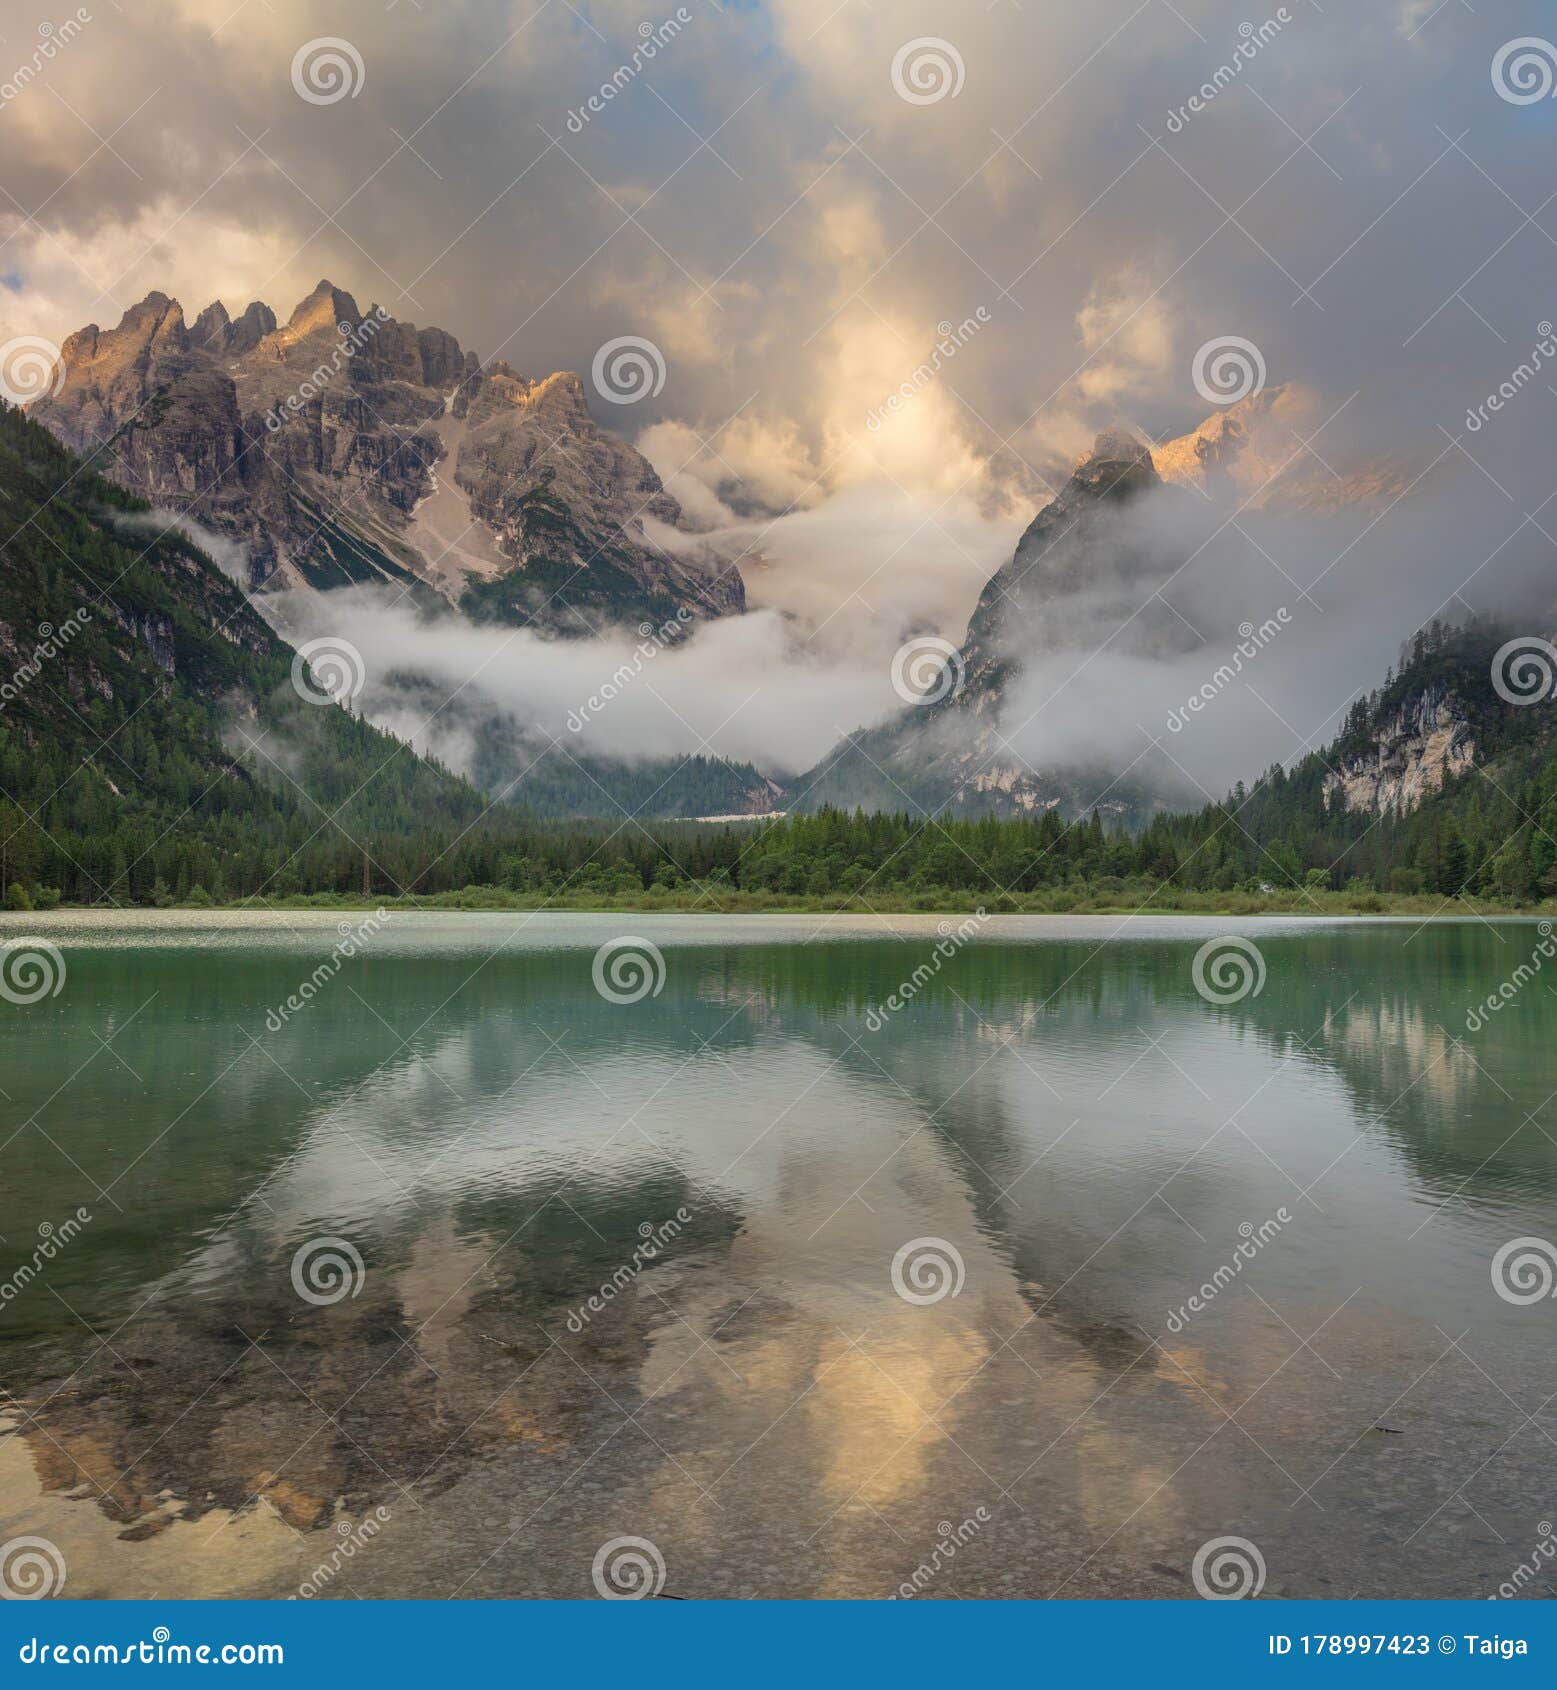 Mountains Lake At The Foggy Morning Wild Forest Dnd Alps Mountains Stock Image Image Of Nature Landro